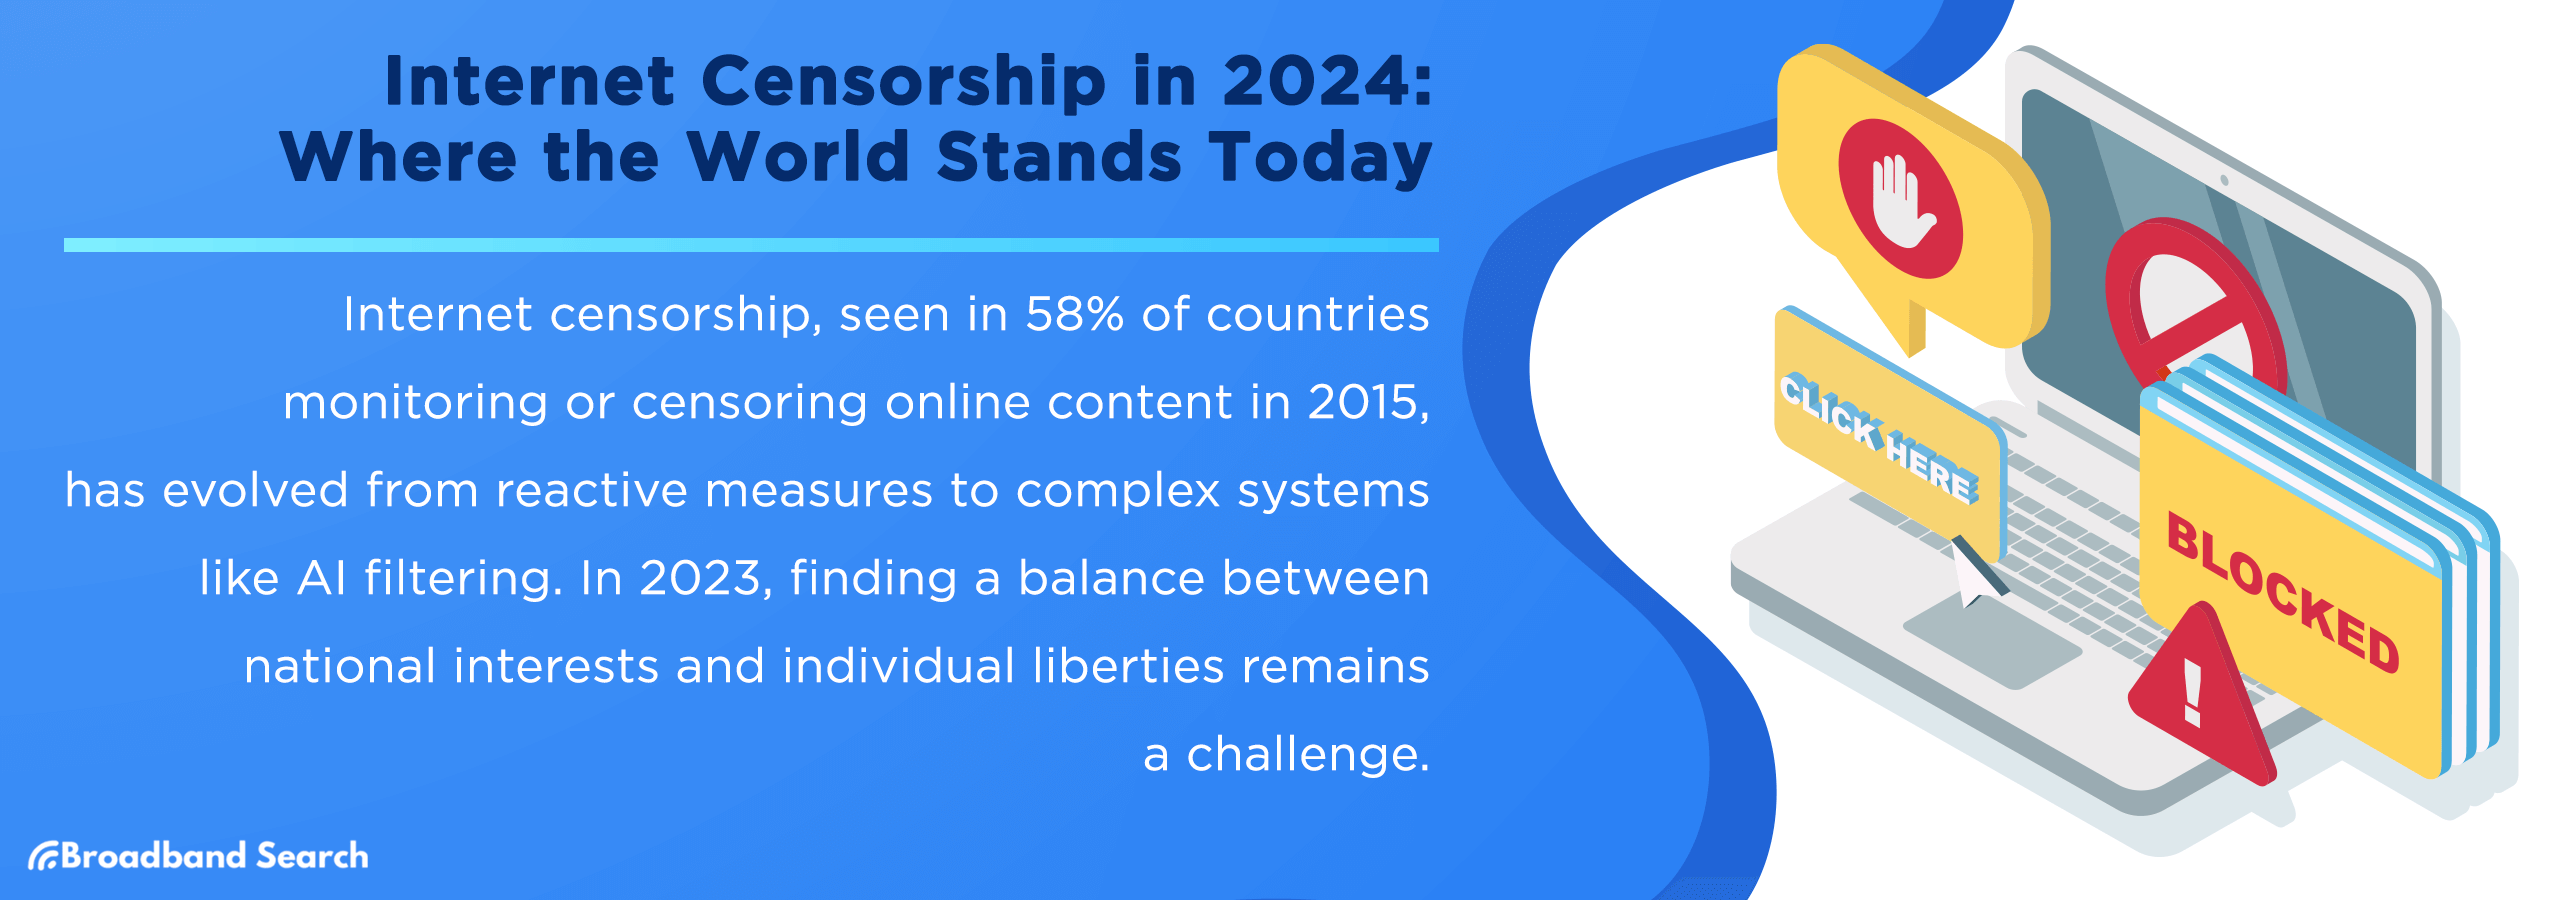 Internet Censorship in 2024: Where The World Stands Today